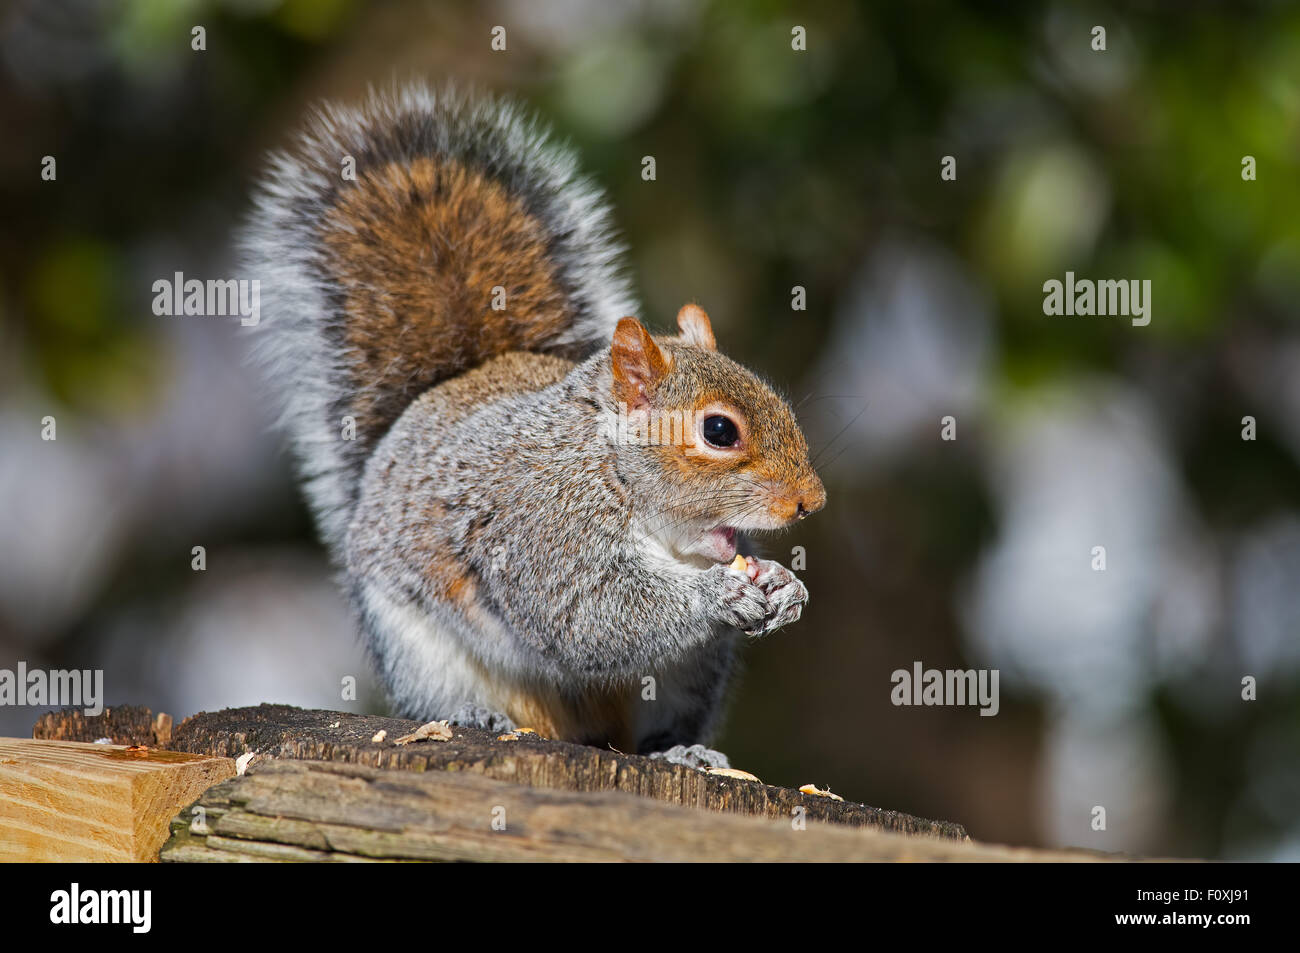 Eastern Gray Squirrel Eating Peanut Stock Photo